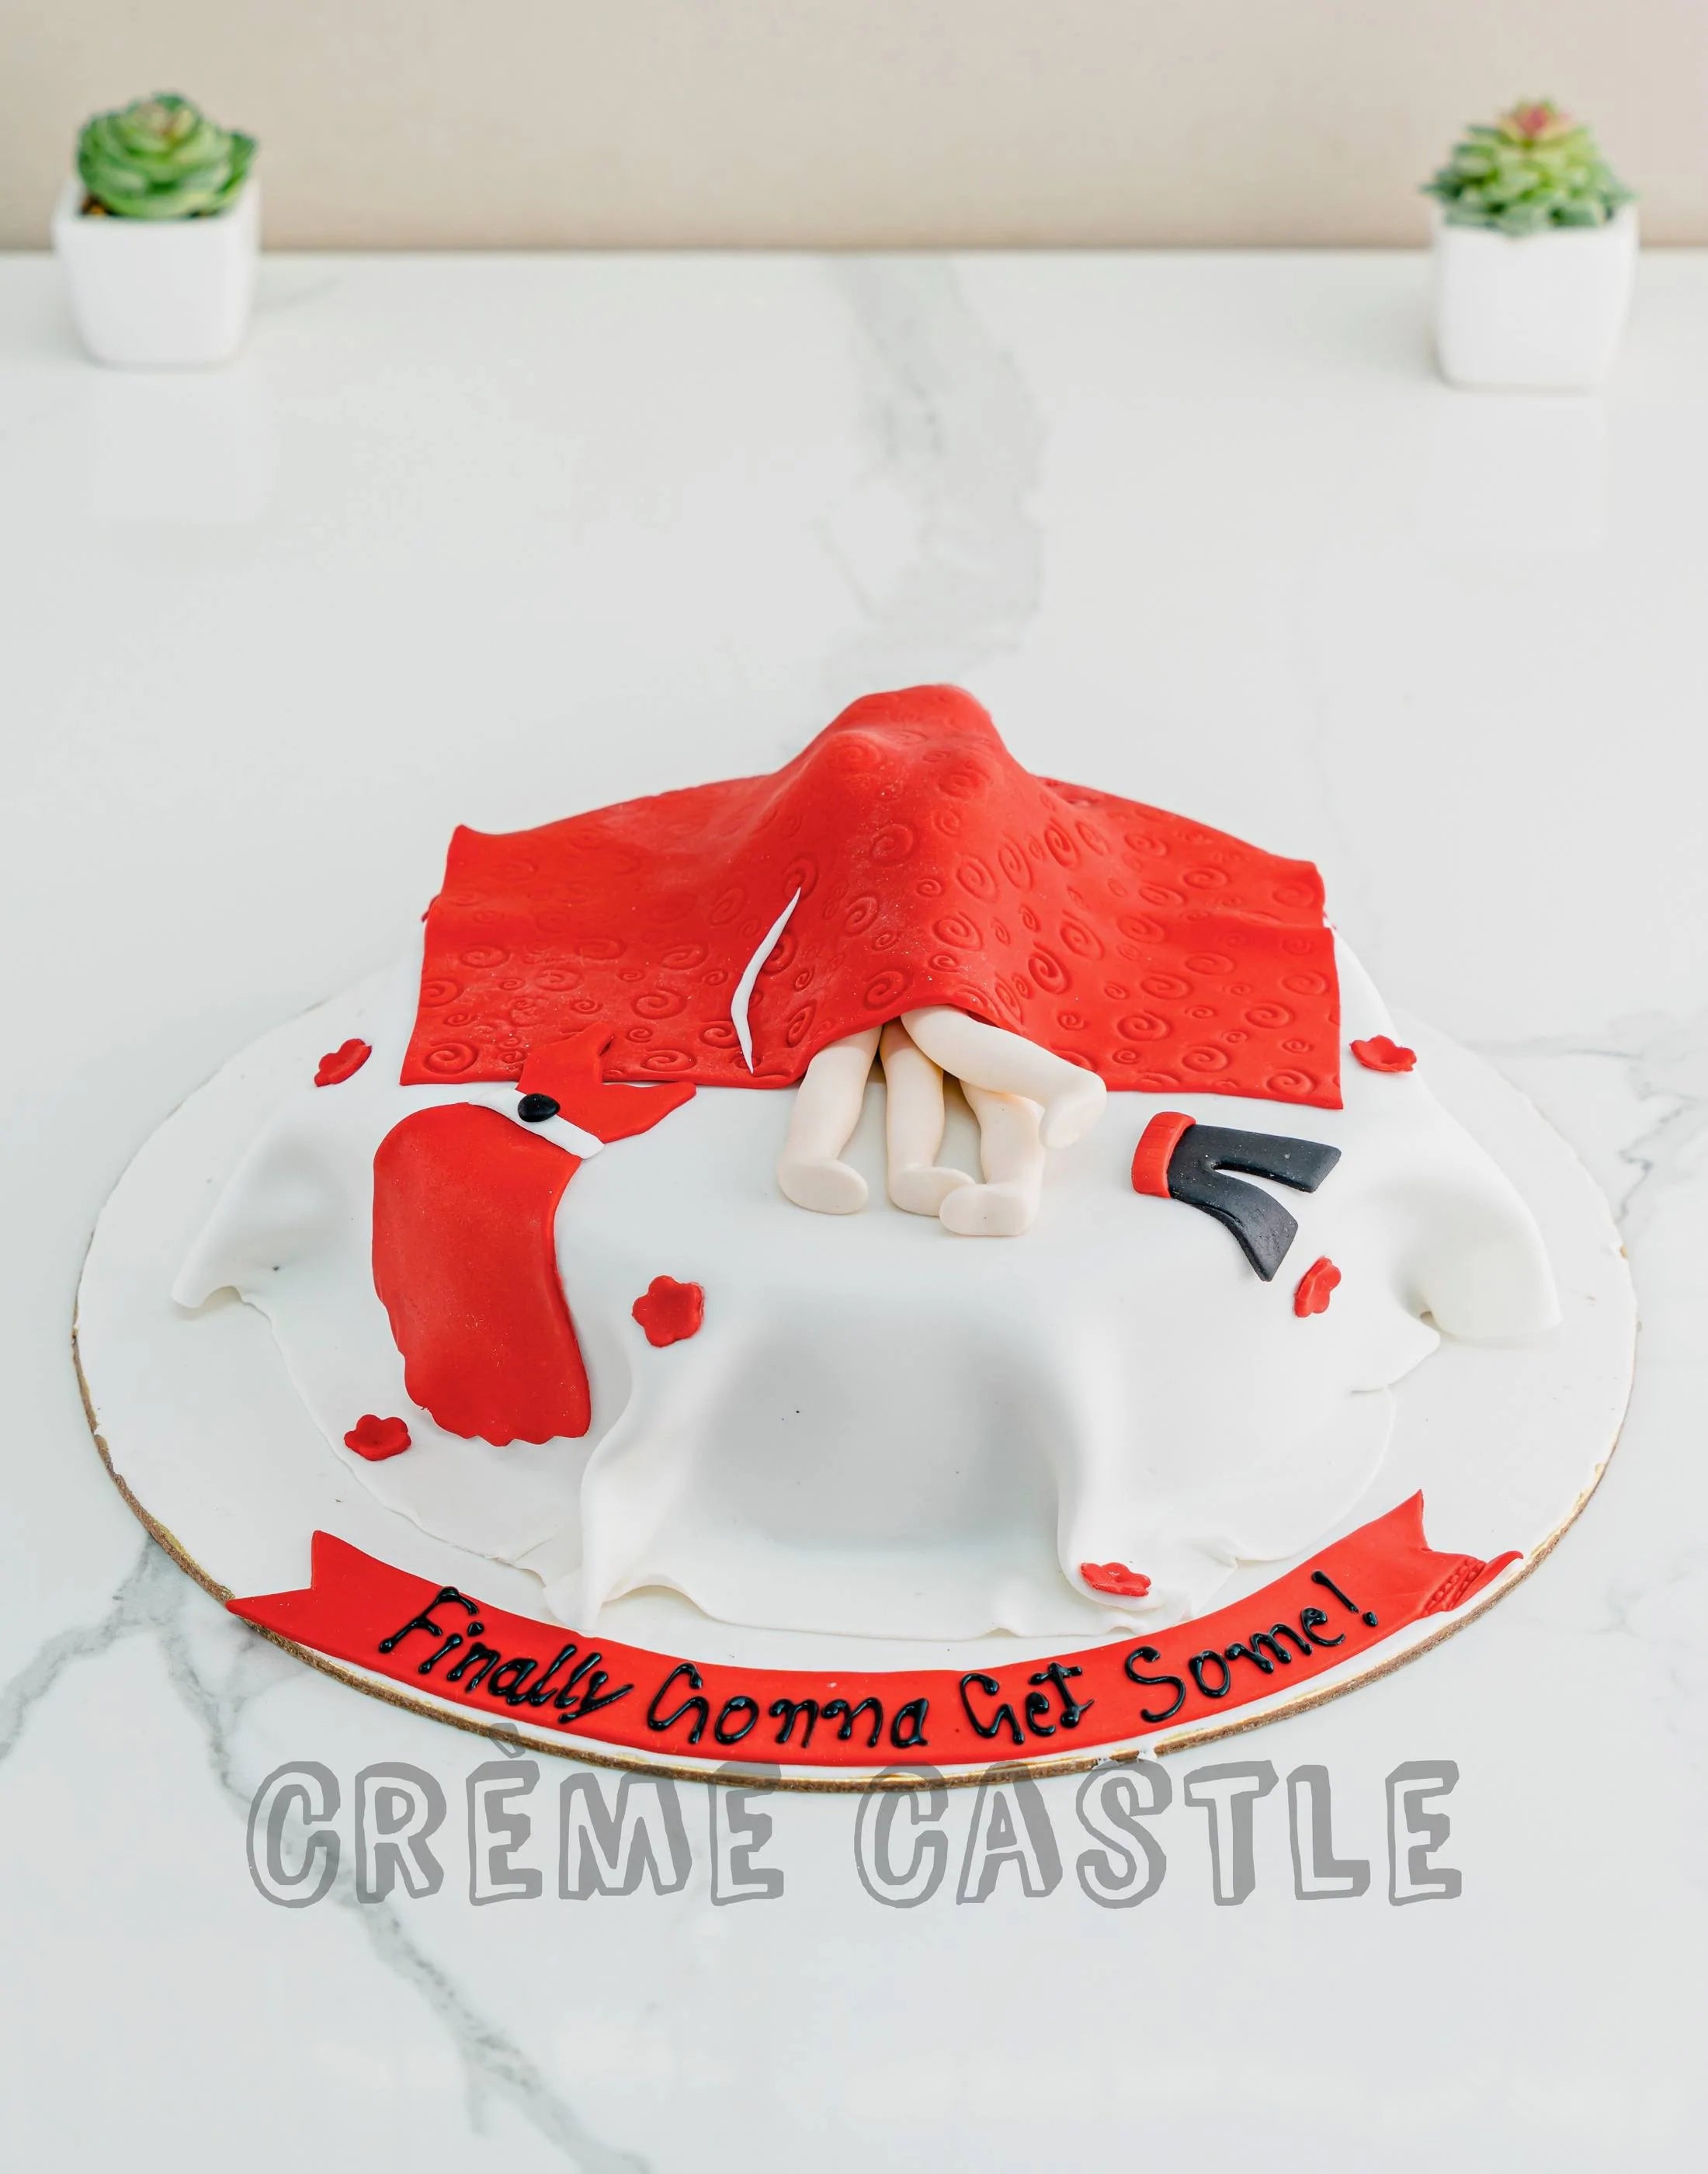 Customized first night cake - The Baker's Table